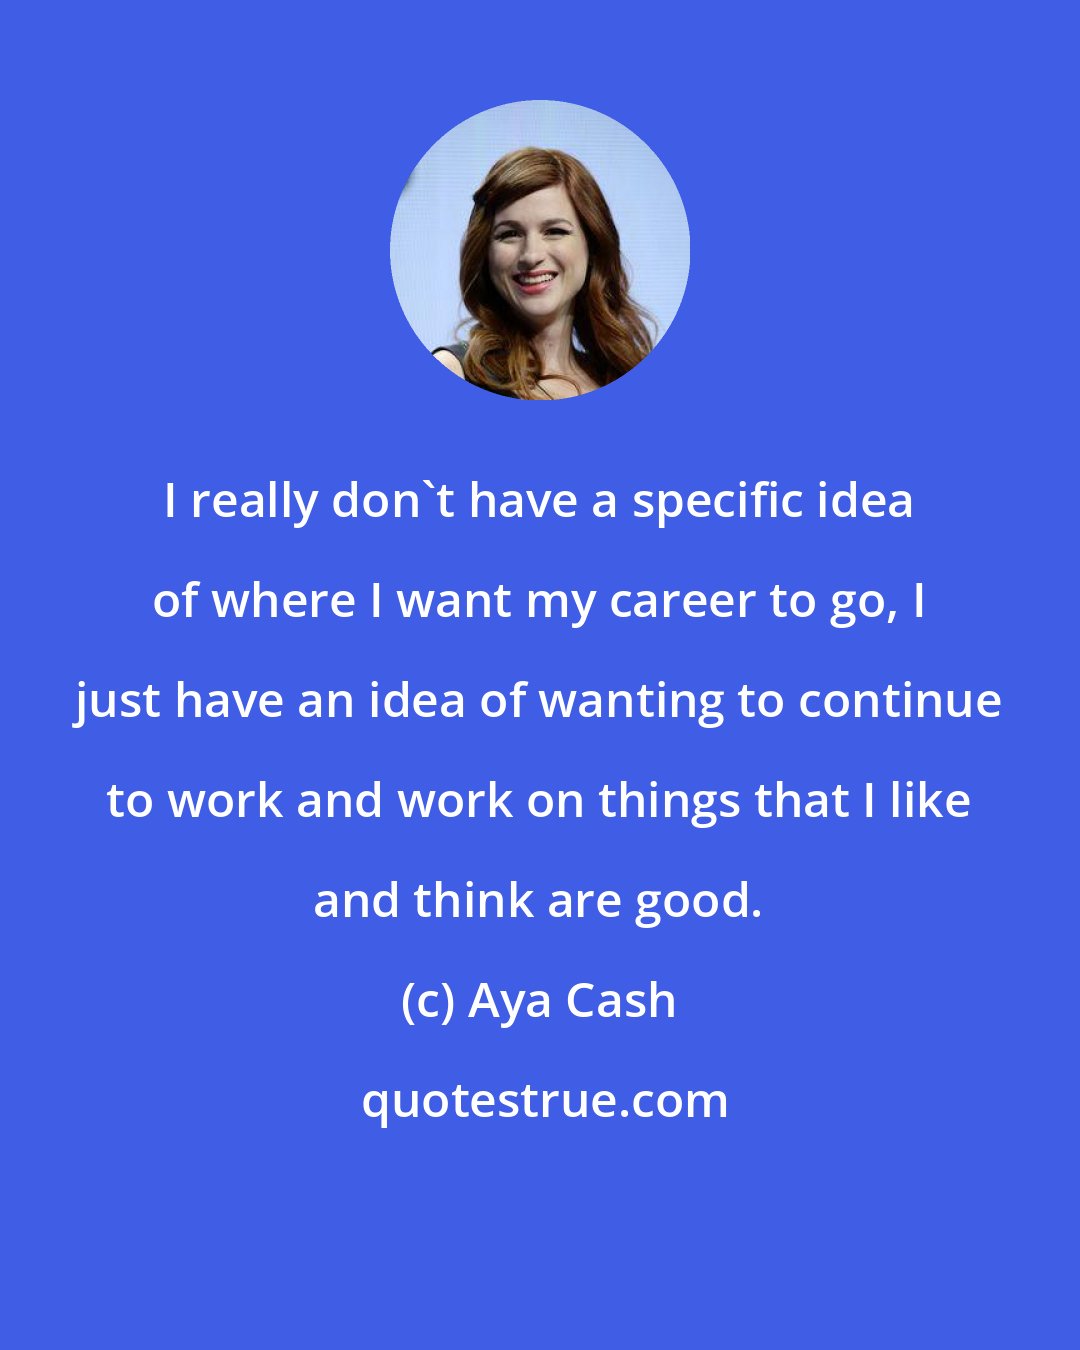 Aya Cash: I really don't have a specific idea of where I want my career to go, I just have an idea of wanting to continue to work and work on things that I like and think are good.